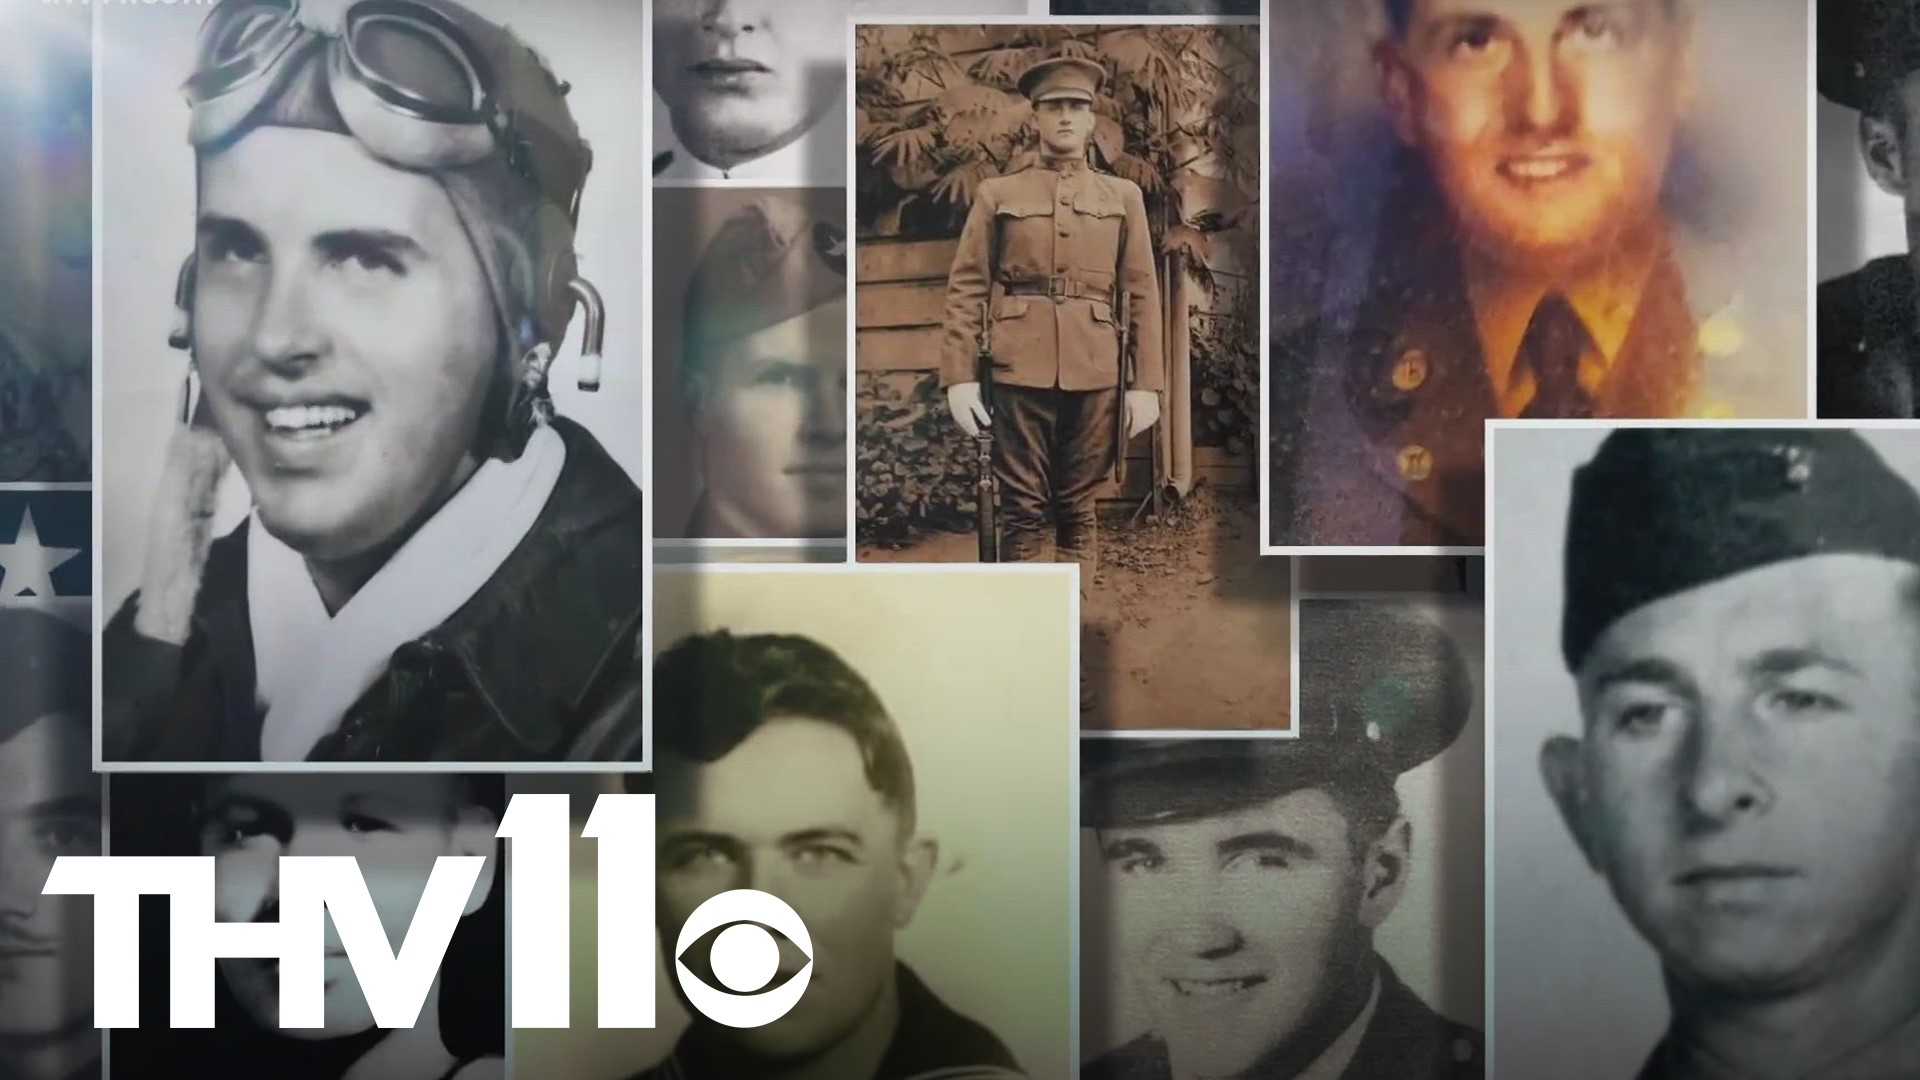 Scientific breakthroughs are helping more and more families get answers and closure by identifying missing soldiers and giving names to the unknown.